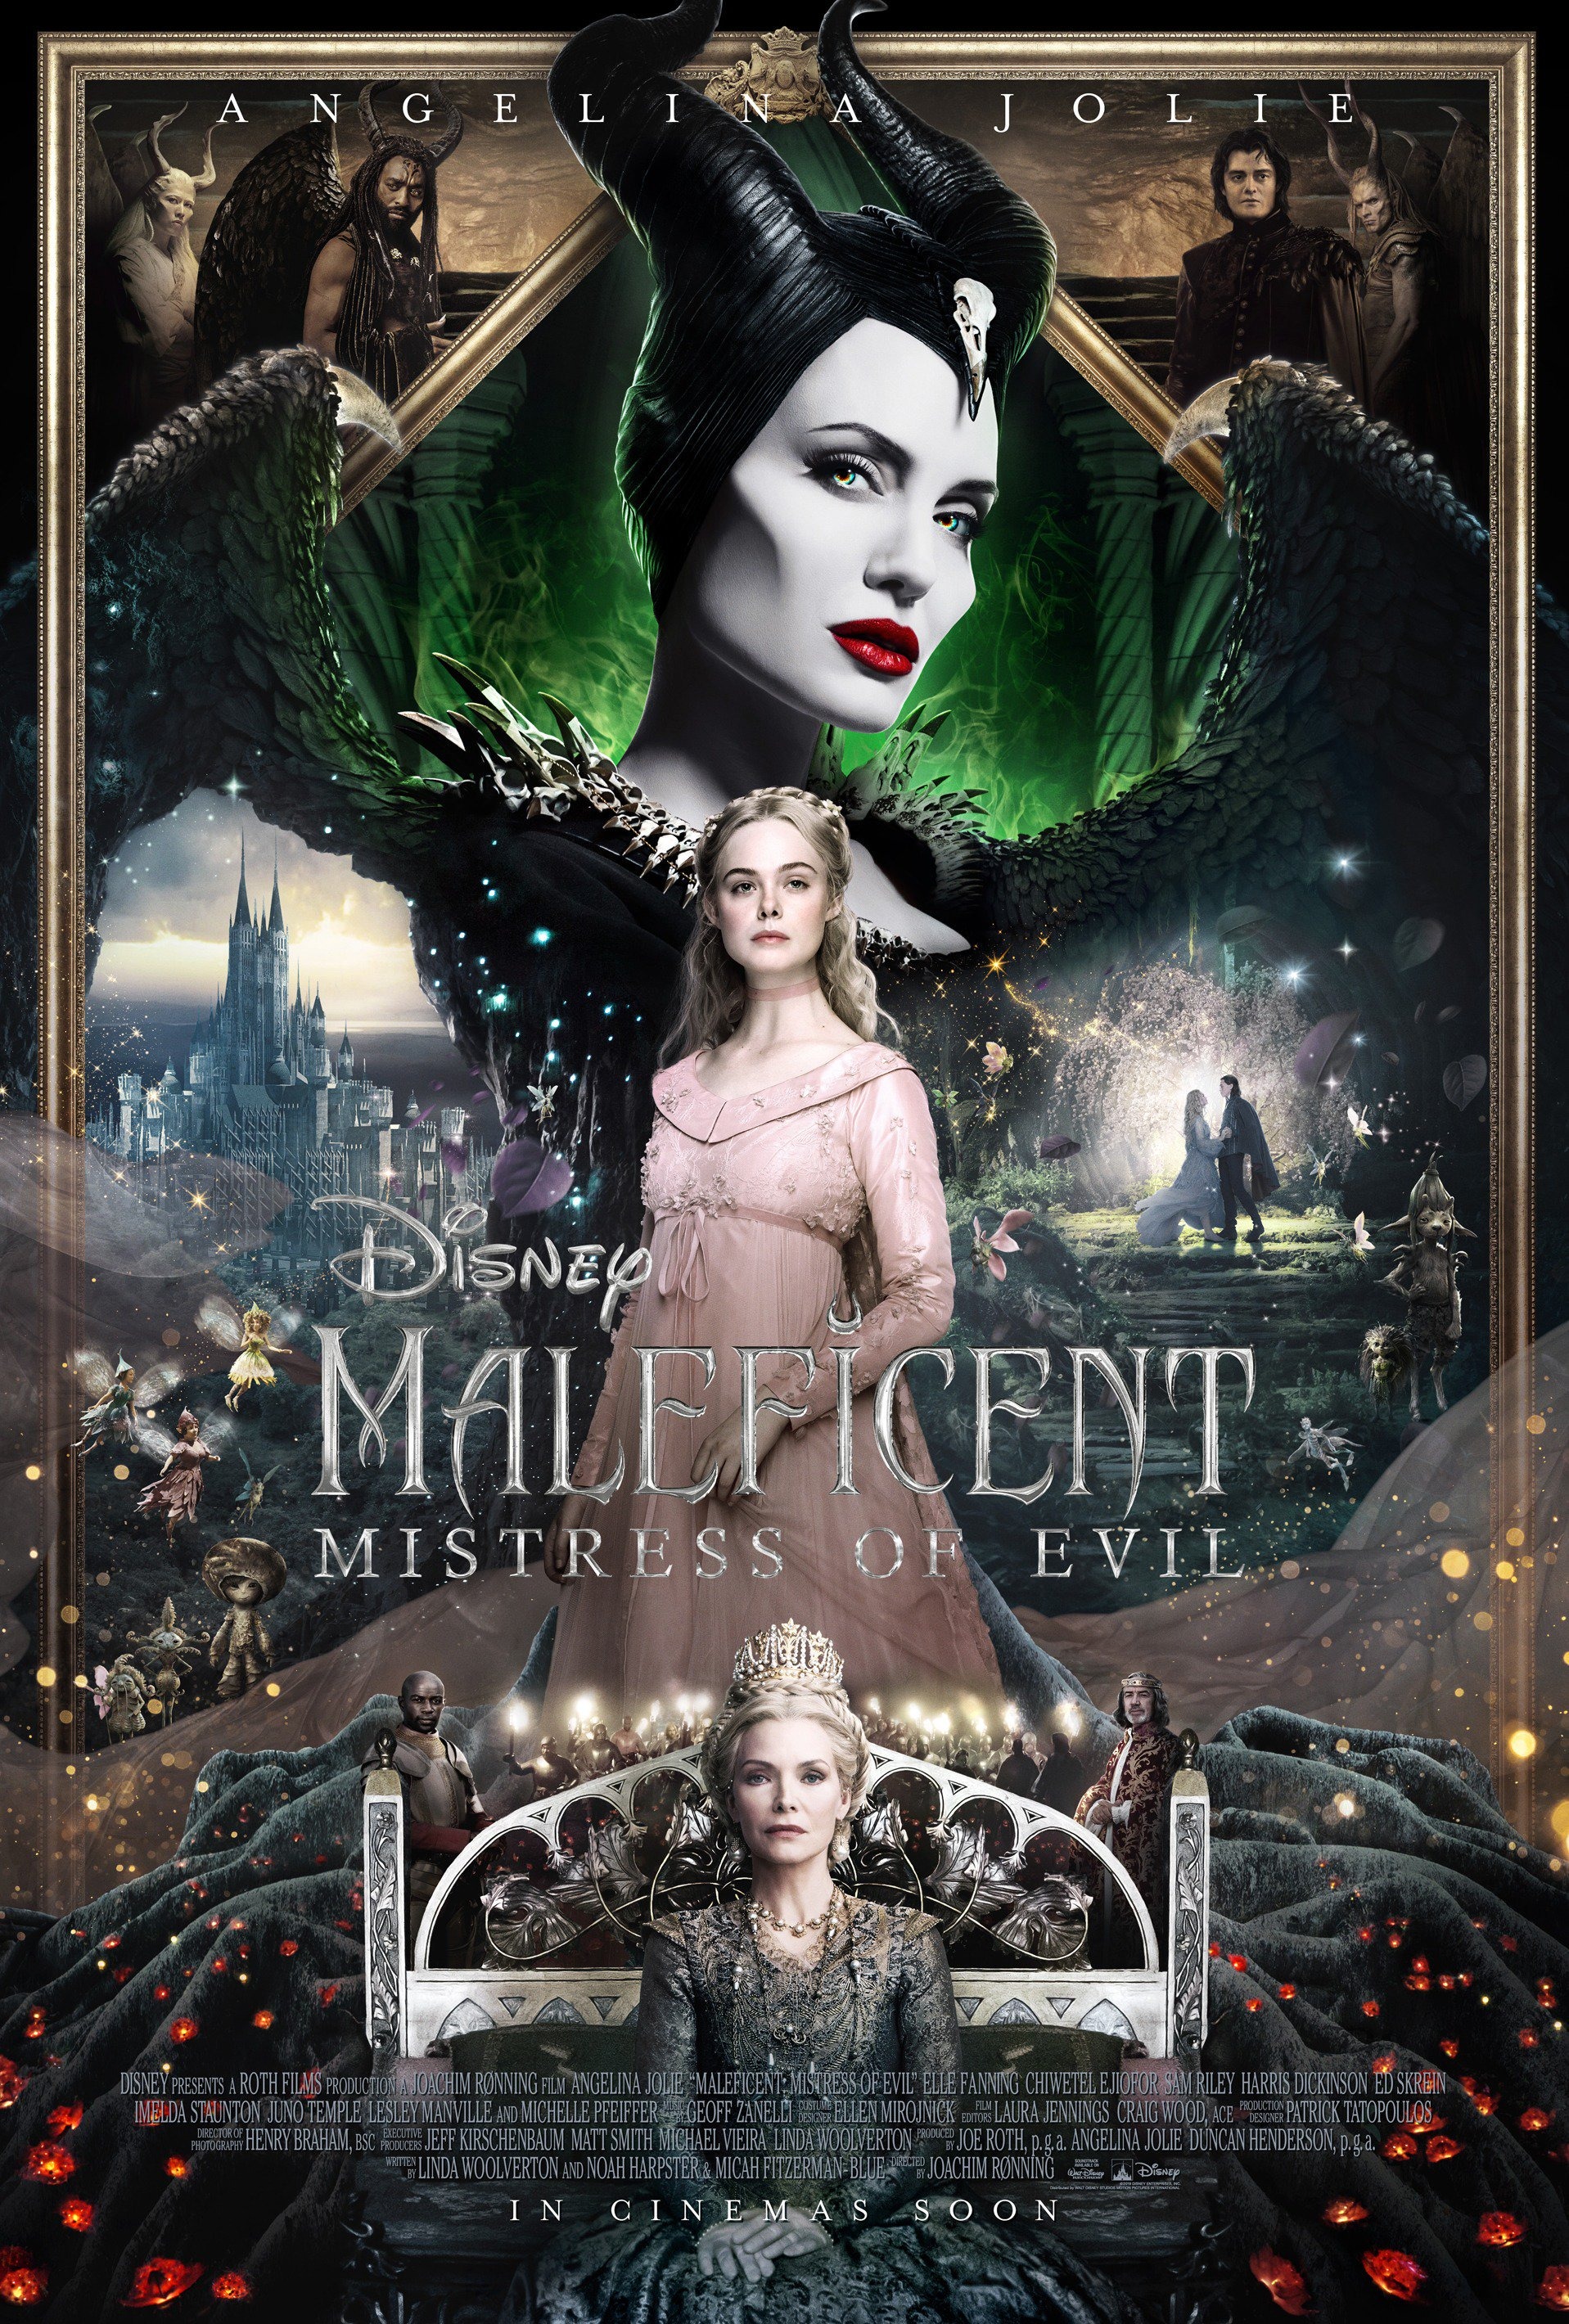 Mega Sized Movie Poster Image for Maleficent: Mistress of Evil (#16 of 16)